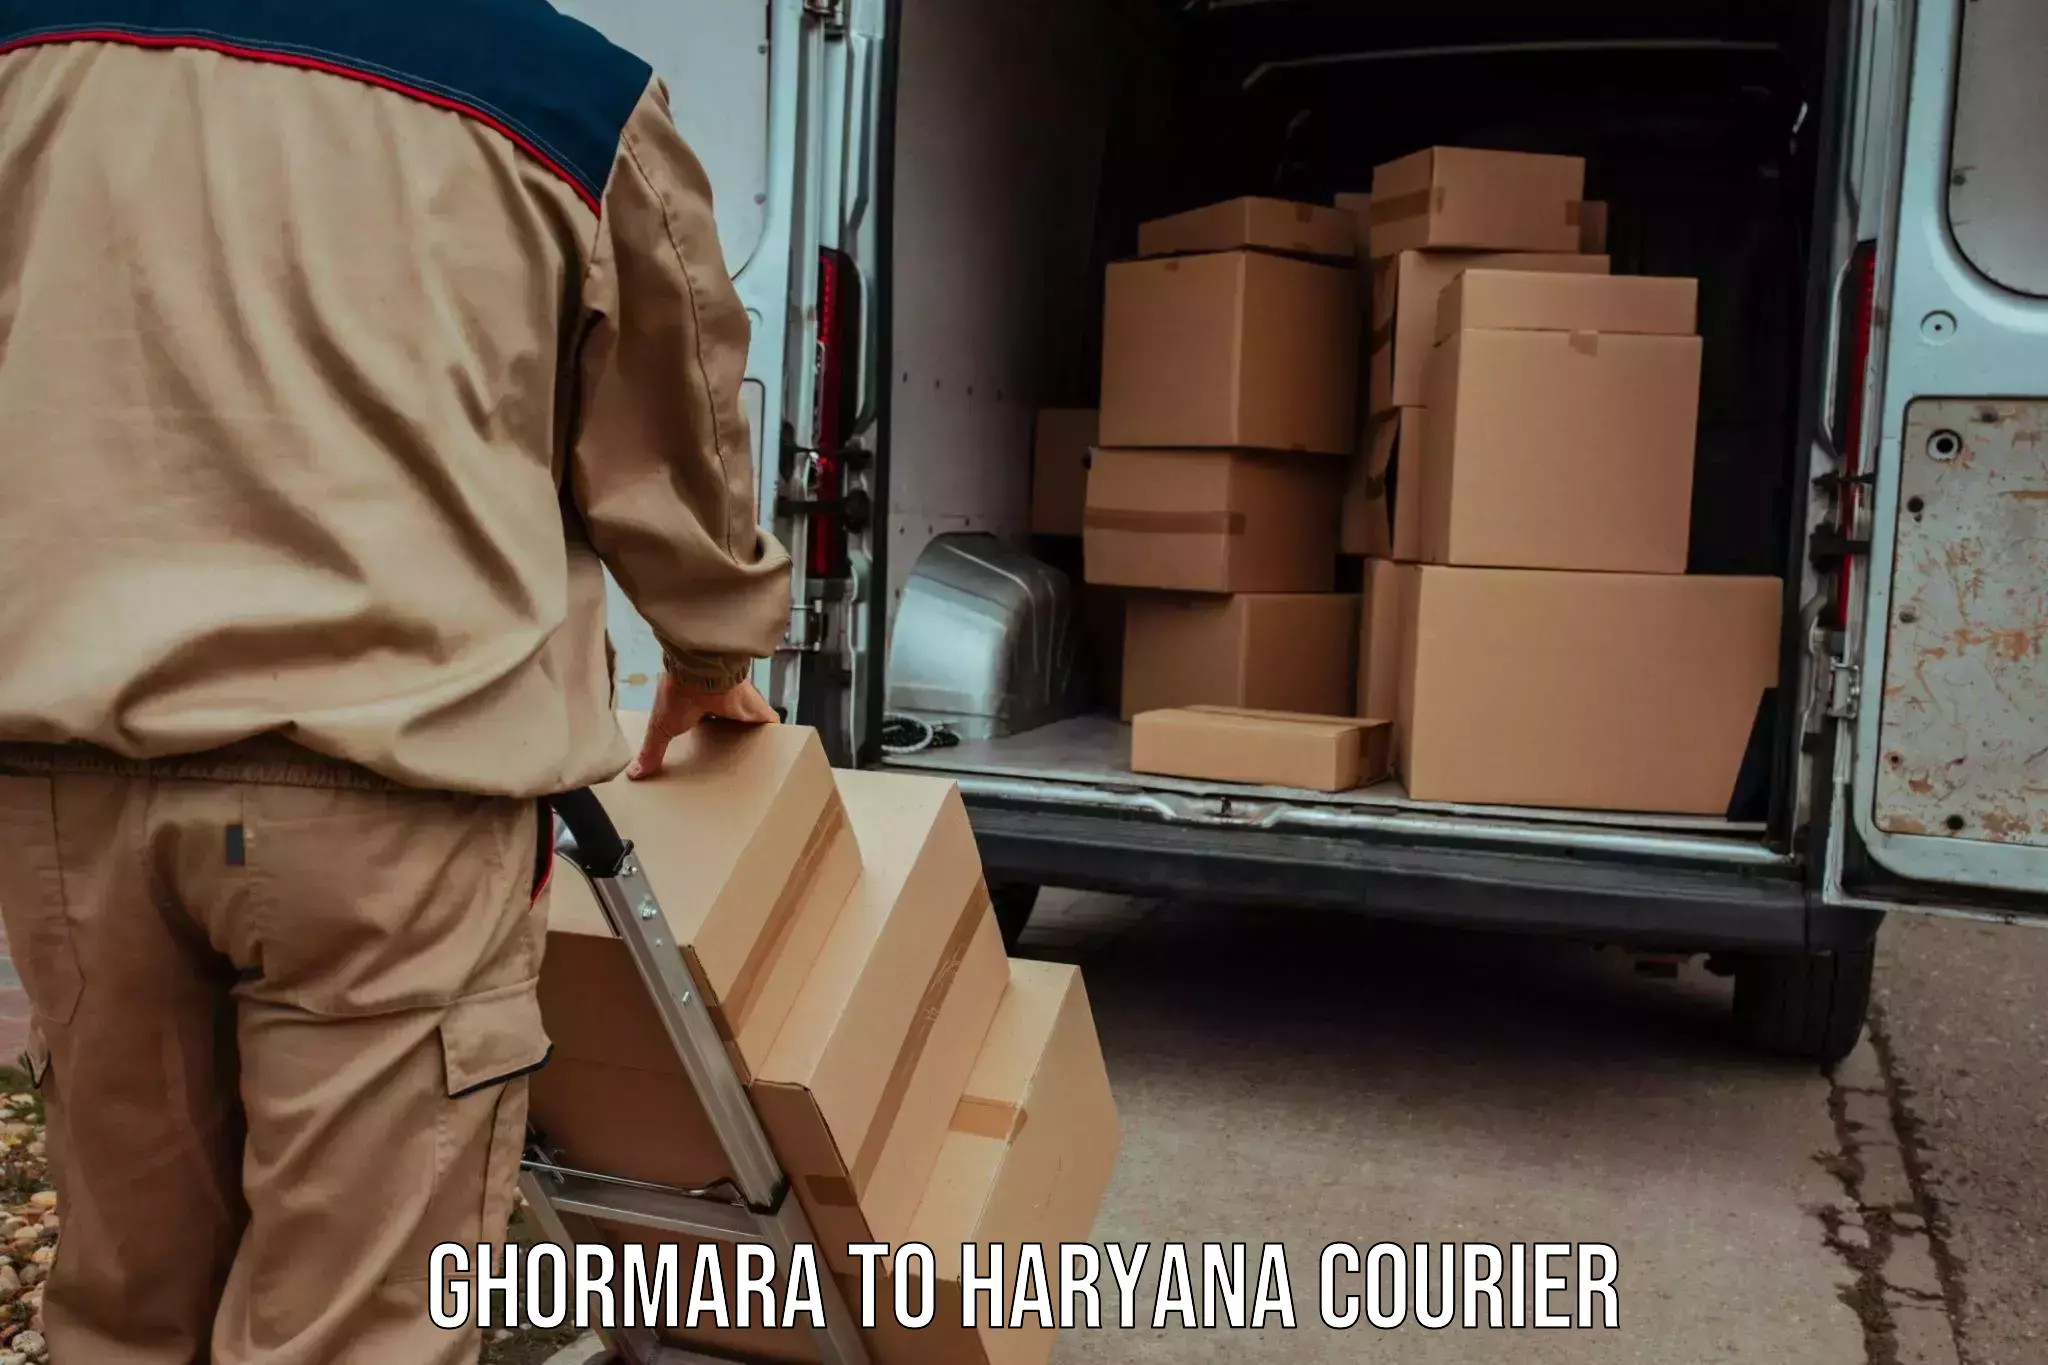 Courier service comparison Ghormara to Pehowa